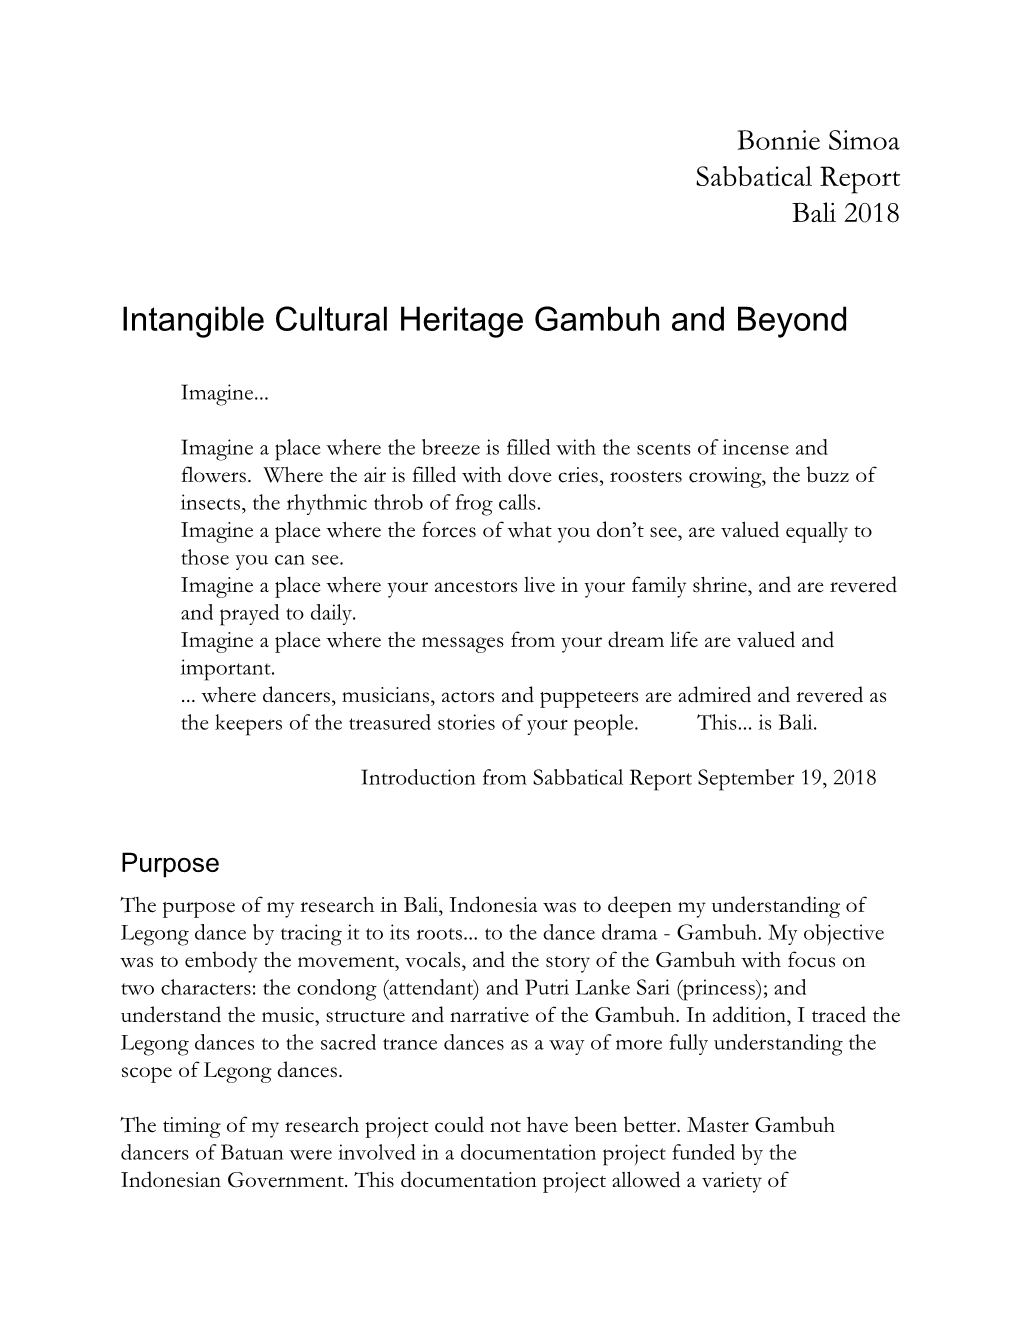 Intangible Cultural Heritage Gambuh and Beyond